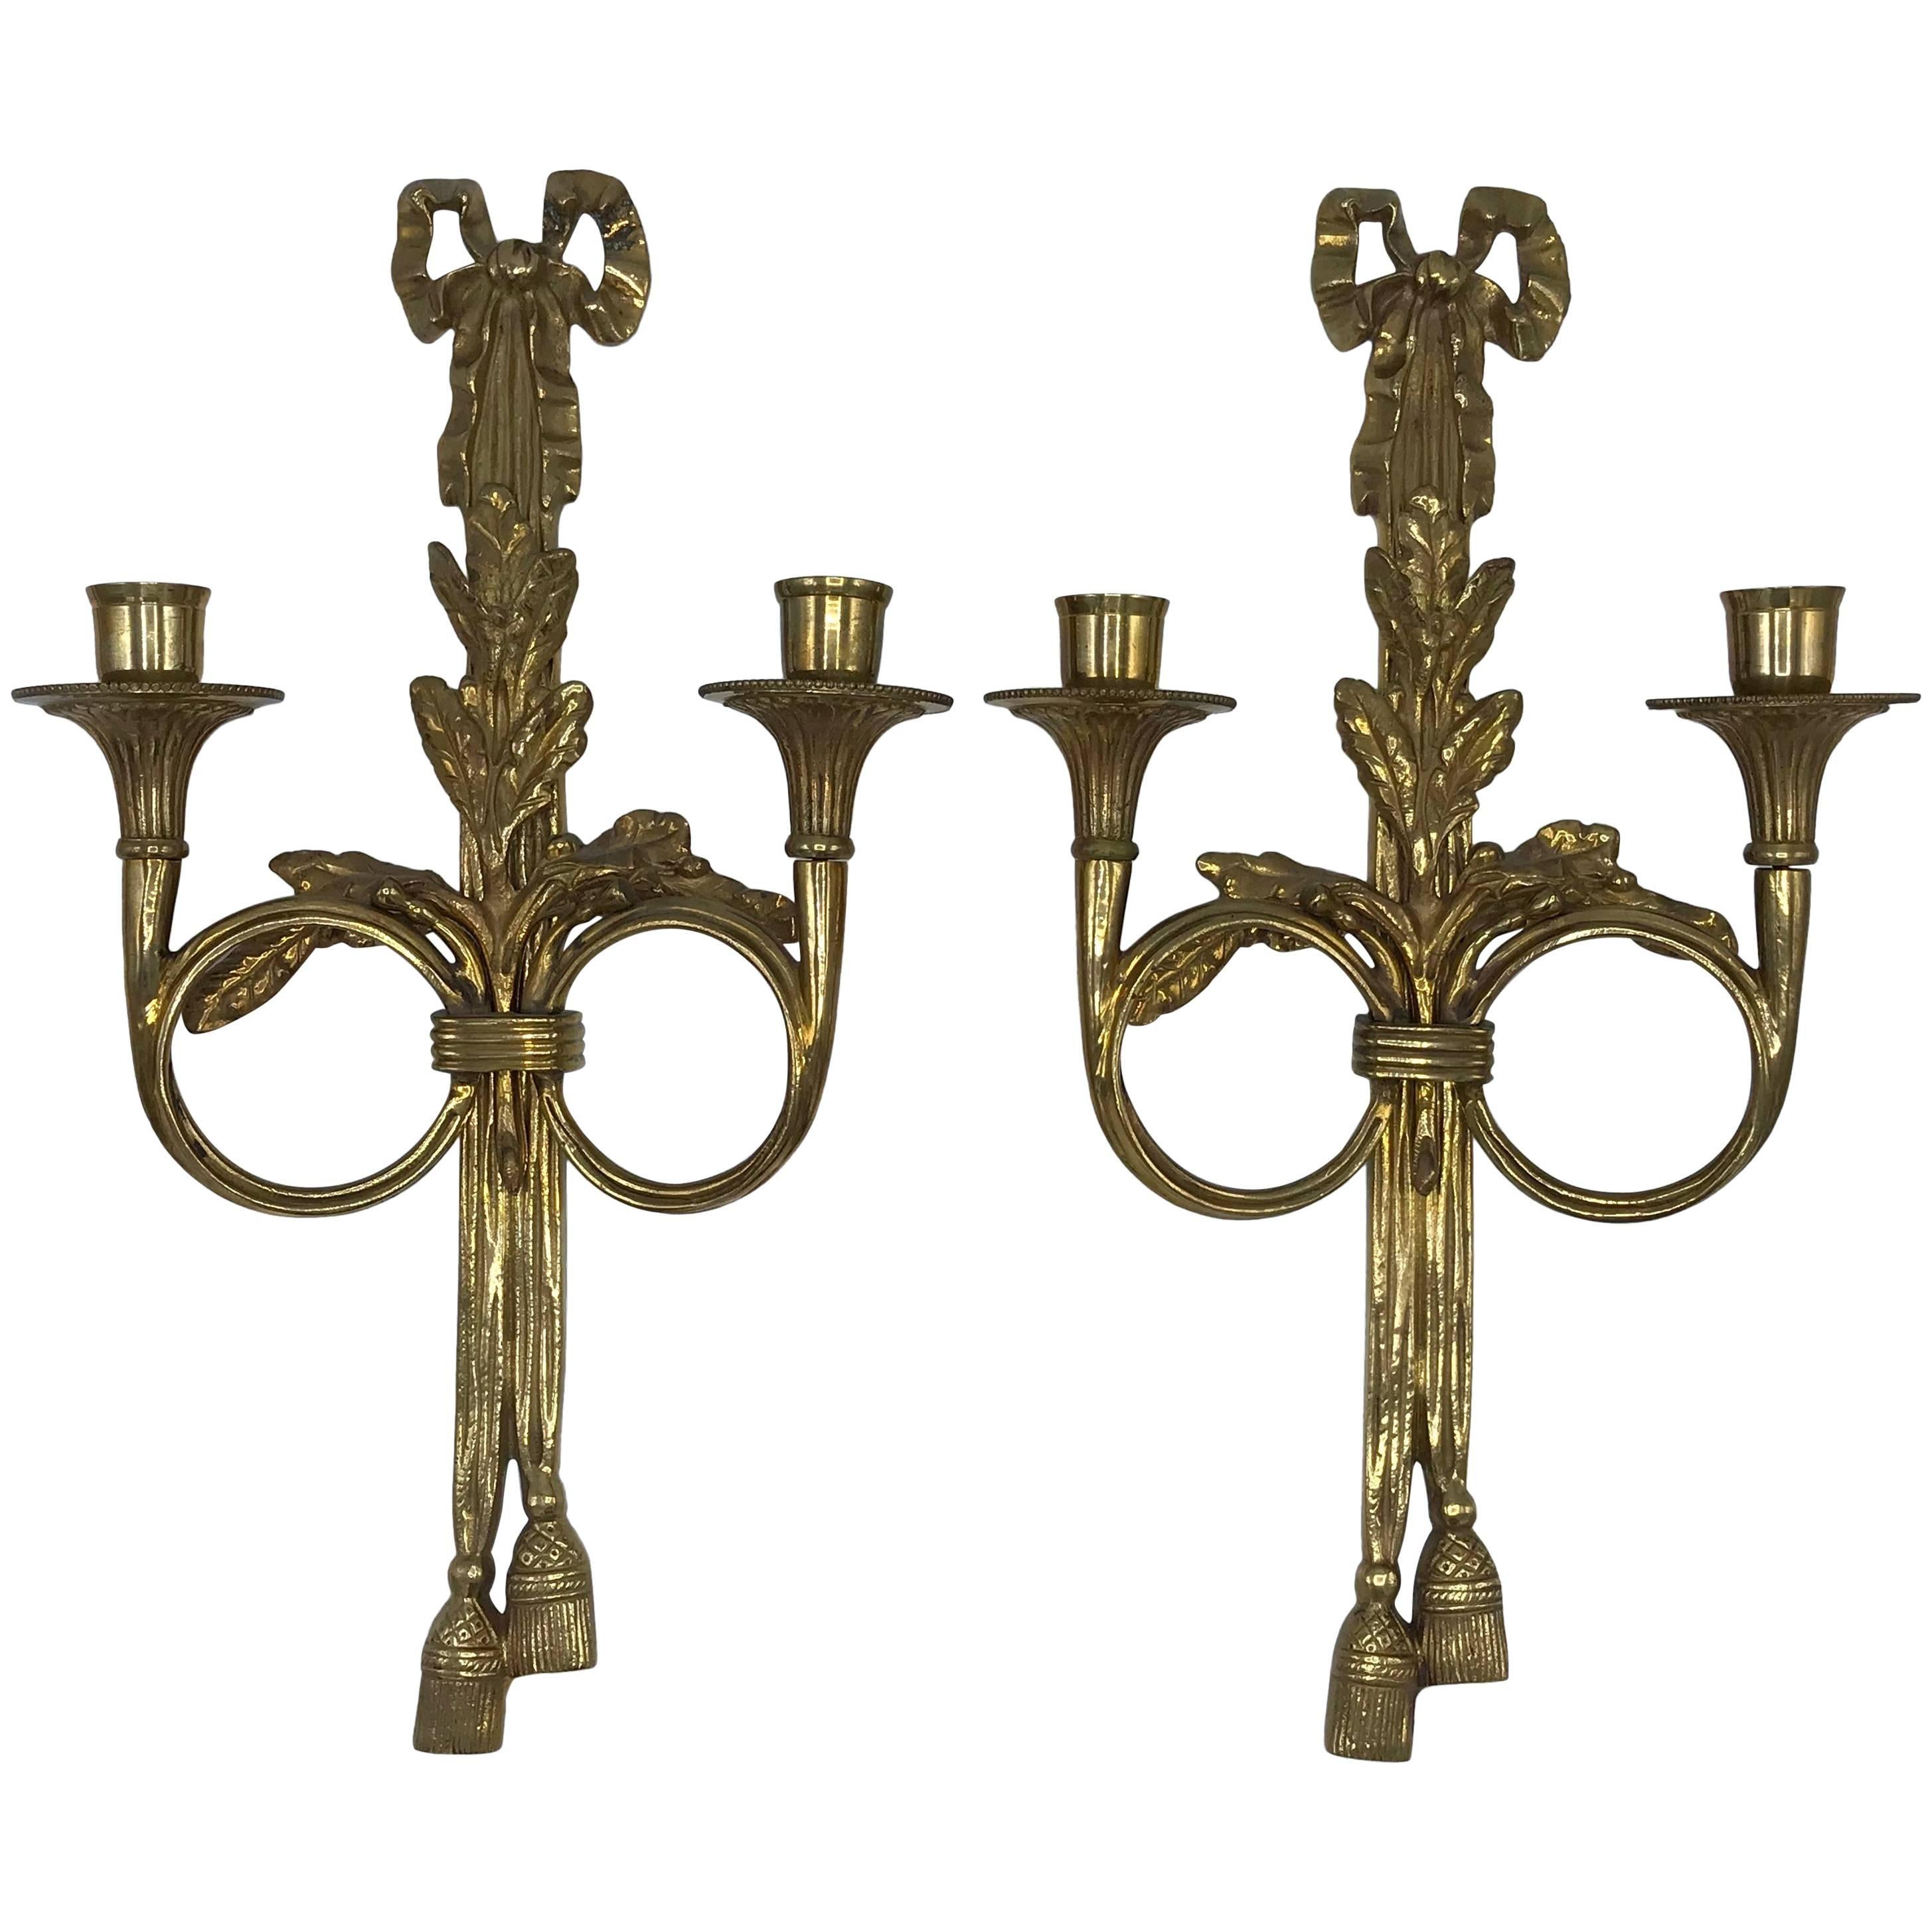 1960s Italian Brass Candlestick Wall Sconces with Tassel and Bow Motif, Pair